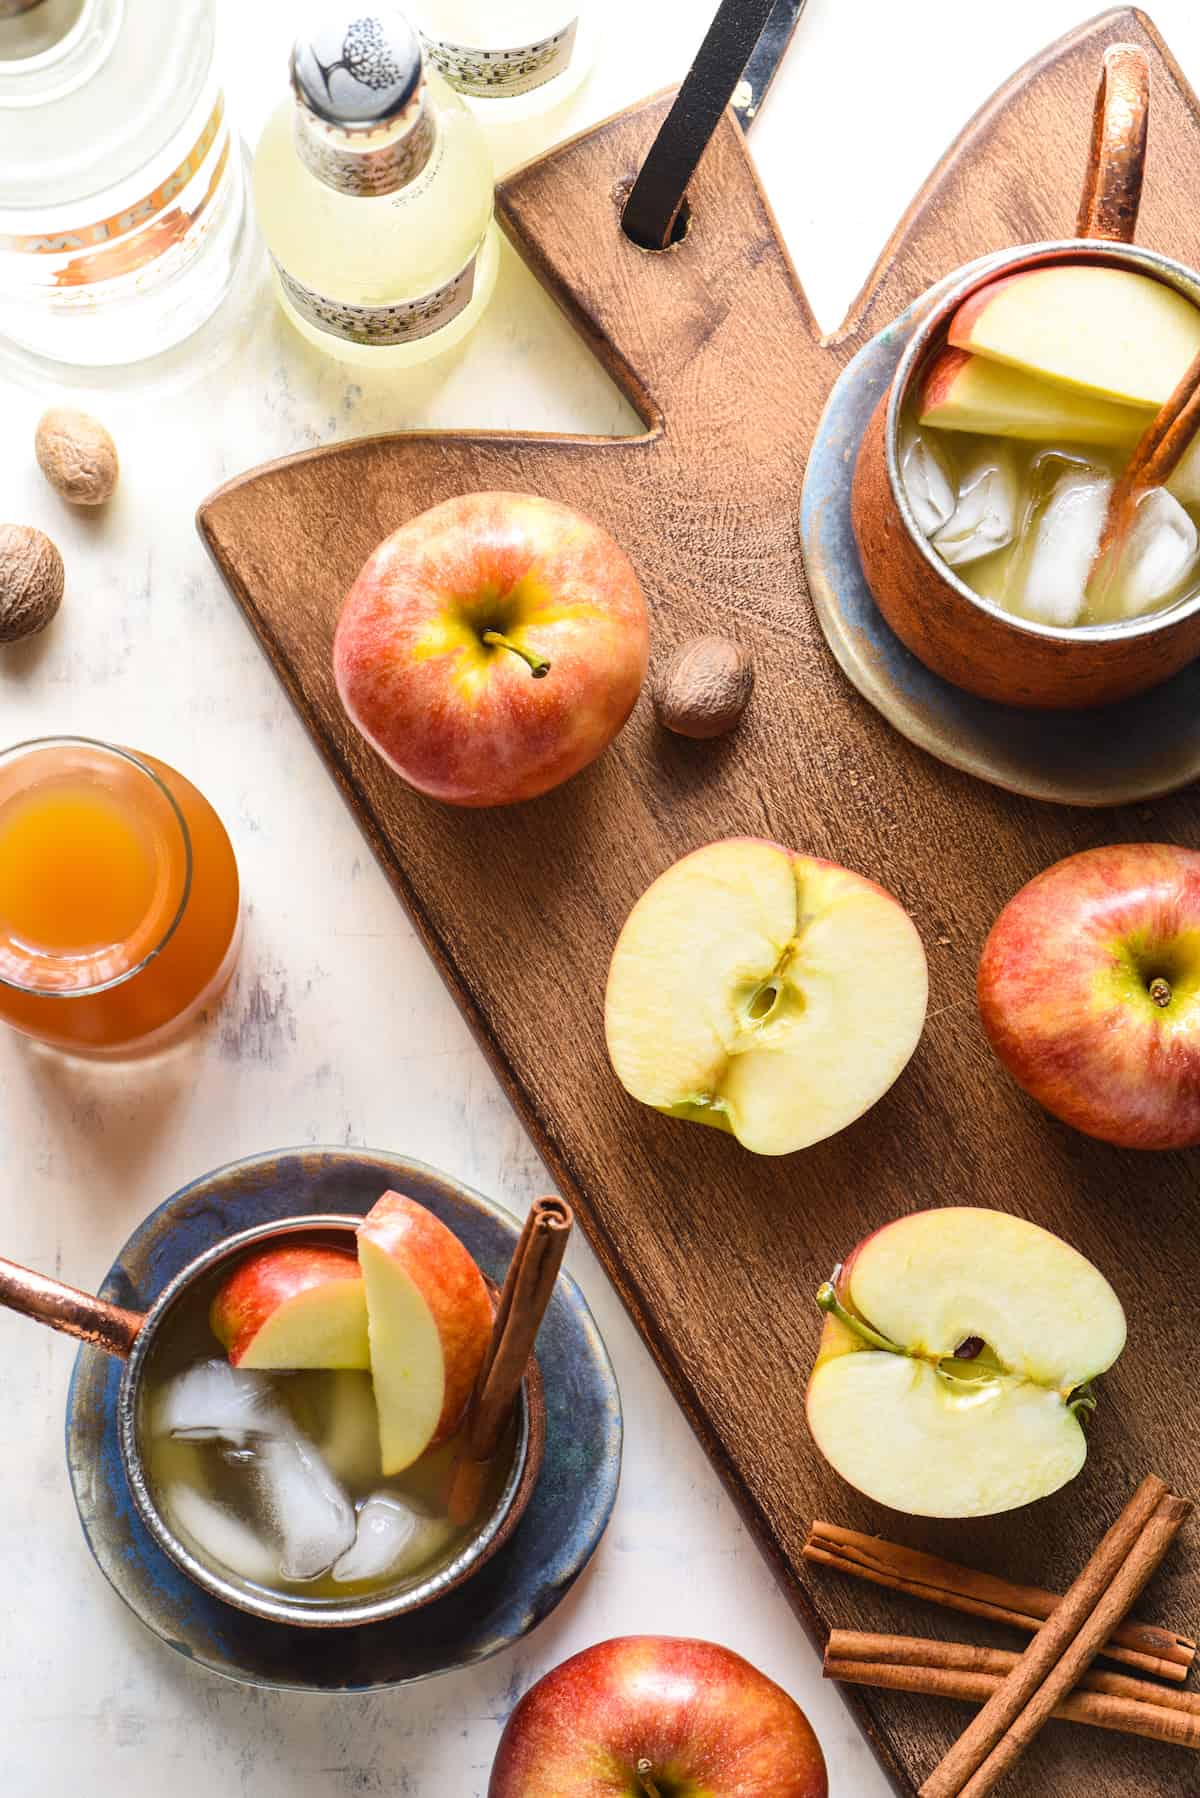 Overhead shot of a wooden cutting board with cut and whole apples, nutmeg pods, bottles, cinnamon sticks, and copper mugs filled with caramel apple cider mule cocktails.